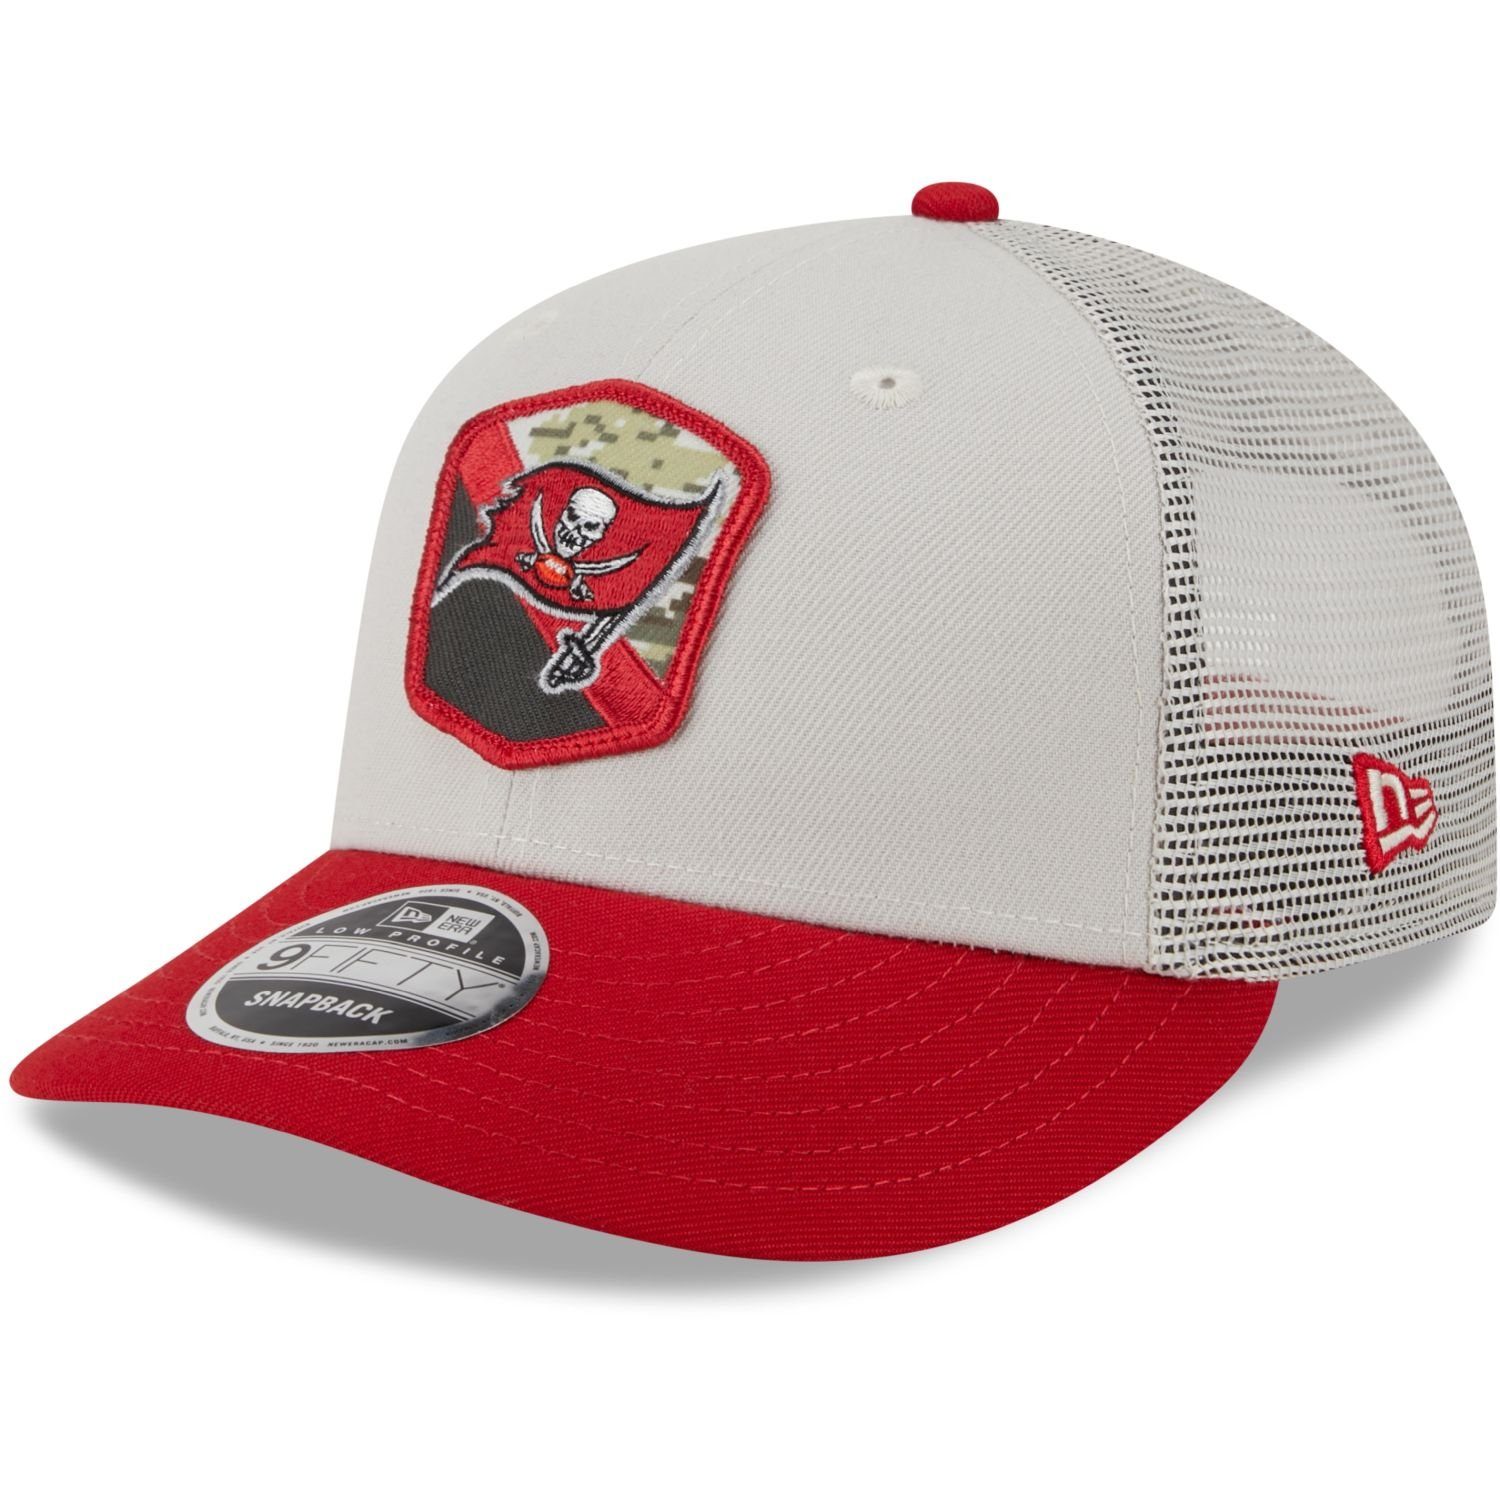 Profile New Snap Era Bay to Buccaneers Snapback Service Cap Salute Tampa Low NFL 9Fifty